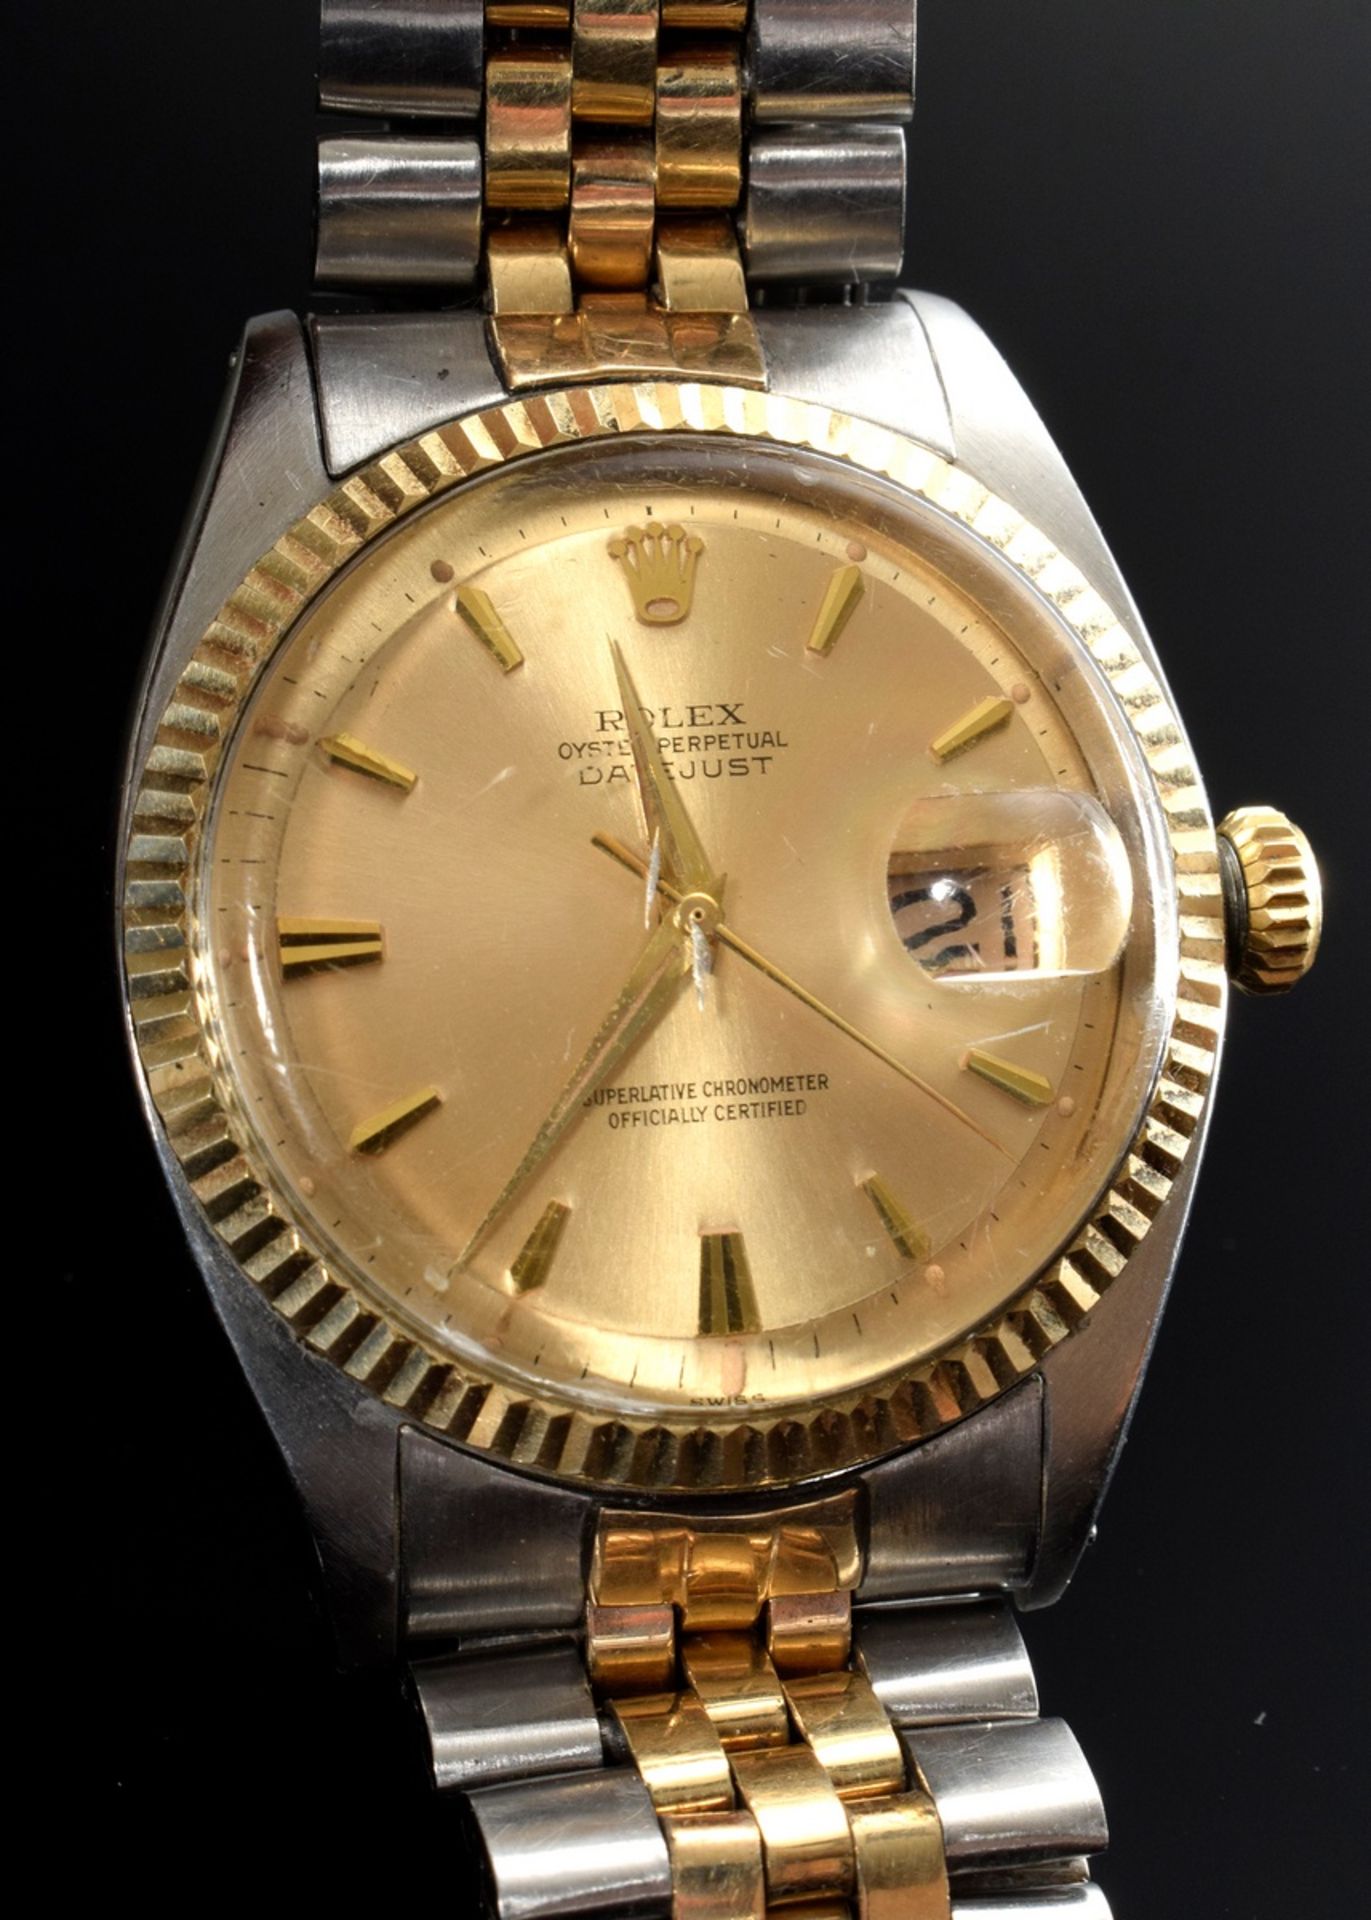 GG 750/stainless steel Rolex "Oyster Perpetual Datejust" men's wristwatch, chronometer, gold dial w - Image 2 of 5